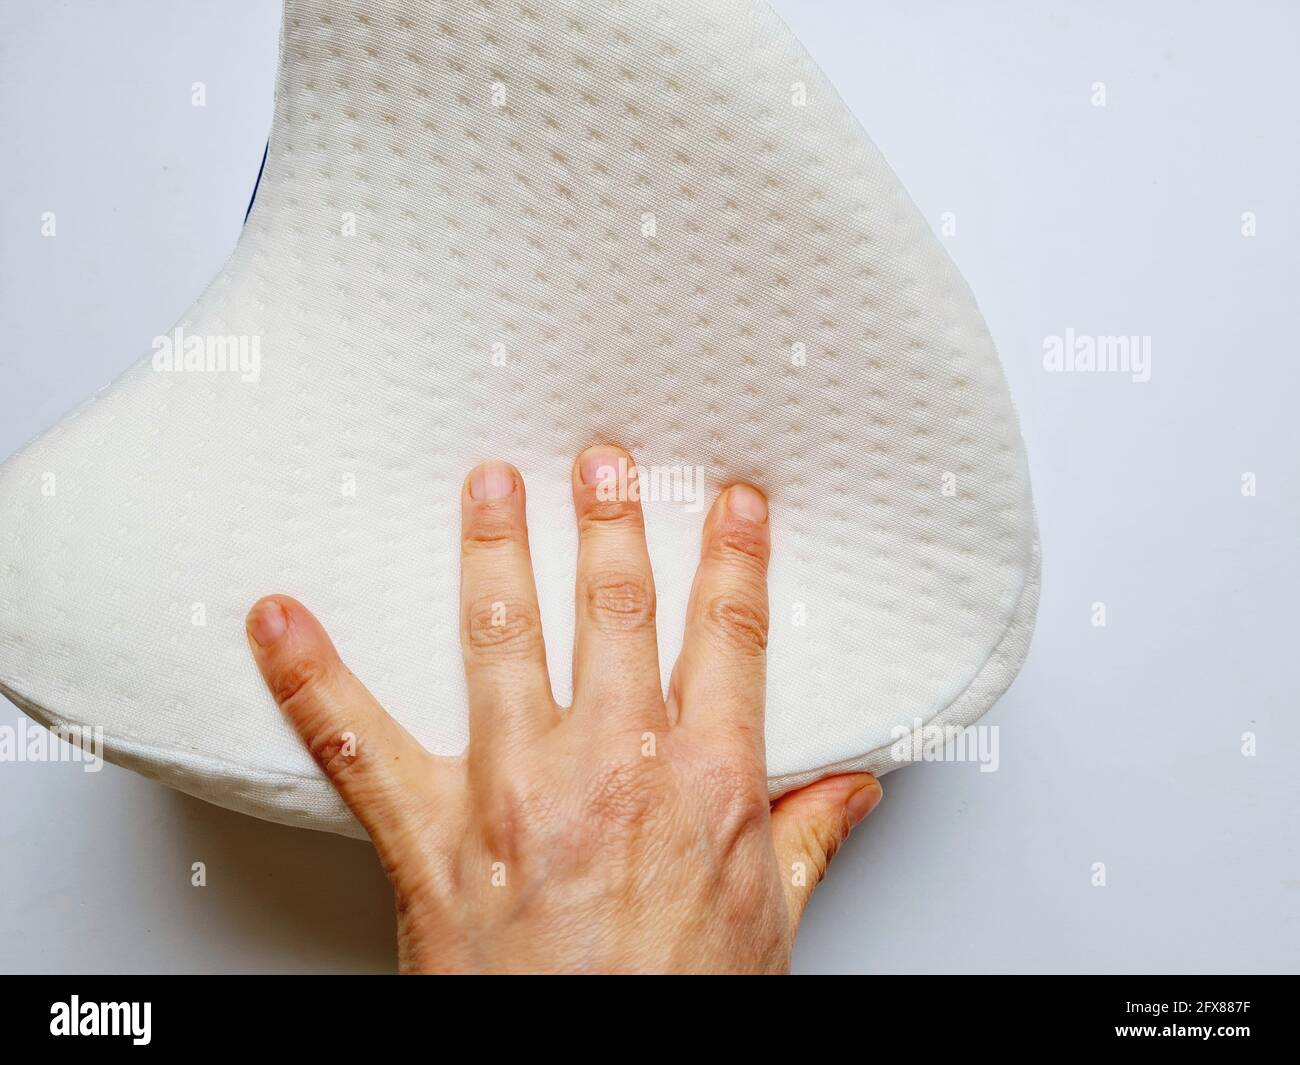 https://c8.alamy.com/comp/2FX887F/closeup-shot-of-a-hand-touching-a-white-memory-foam-knee-pillow-for-sleeping-isolated-in-white-2FX887F.jpg